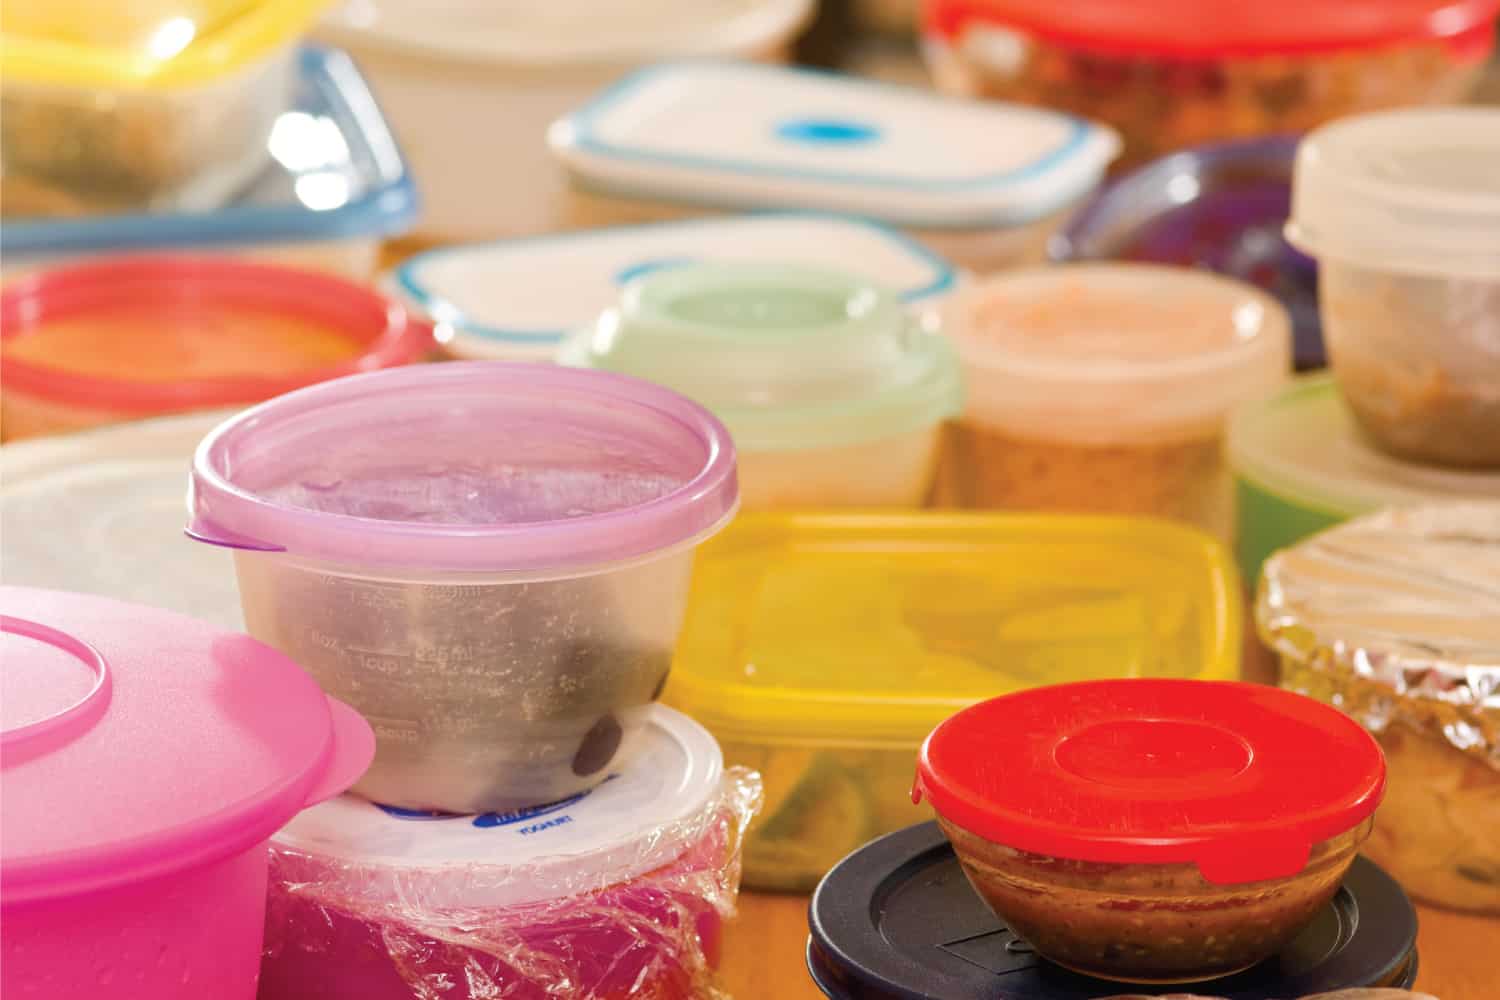 Several plastic food containers with leftovers